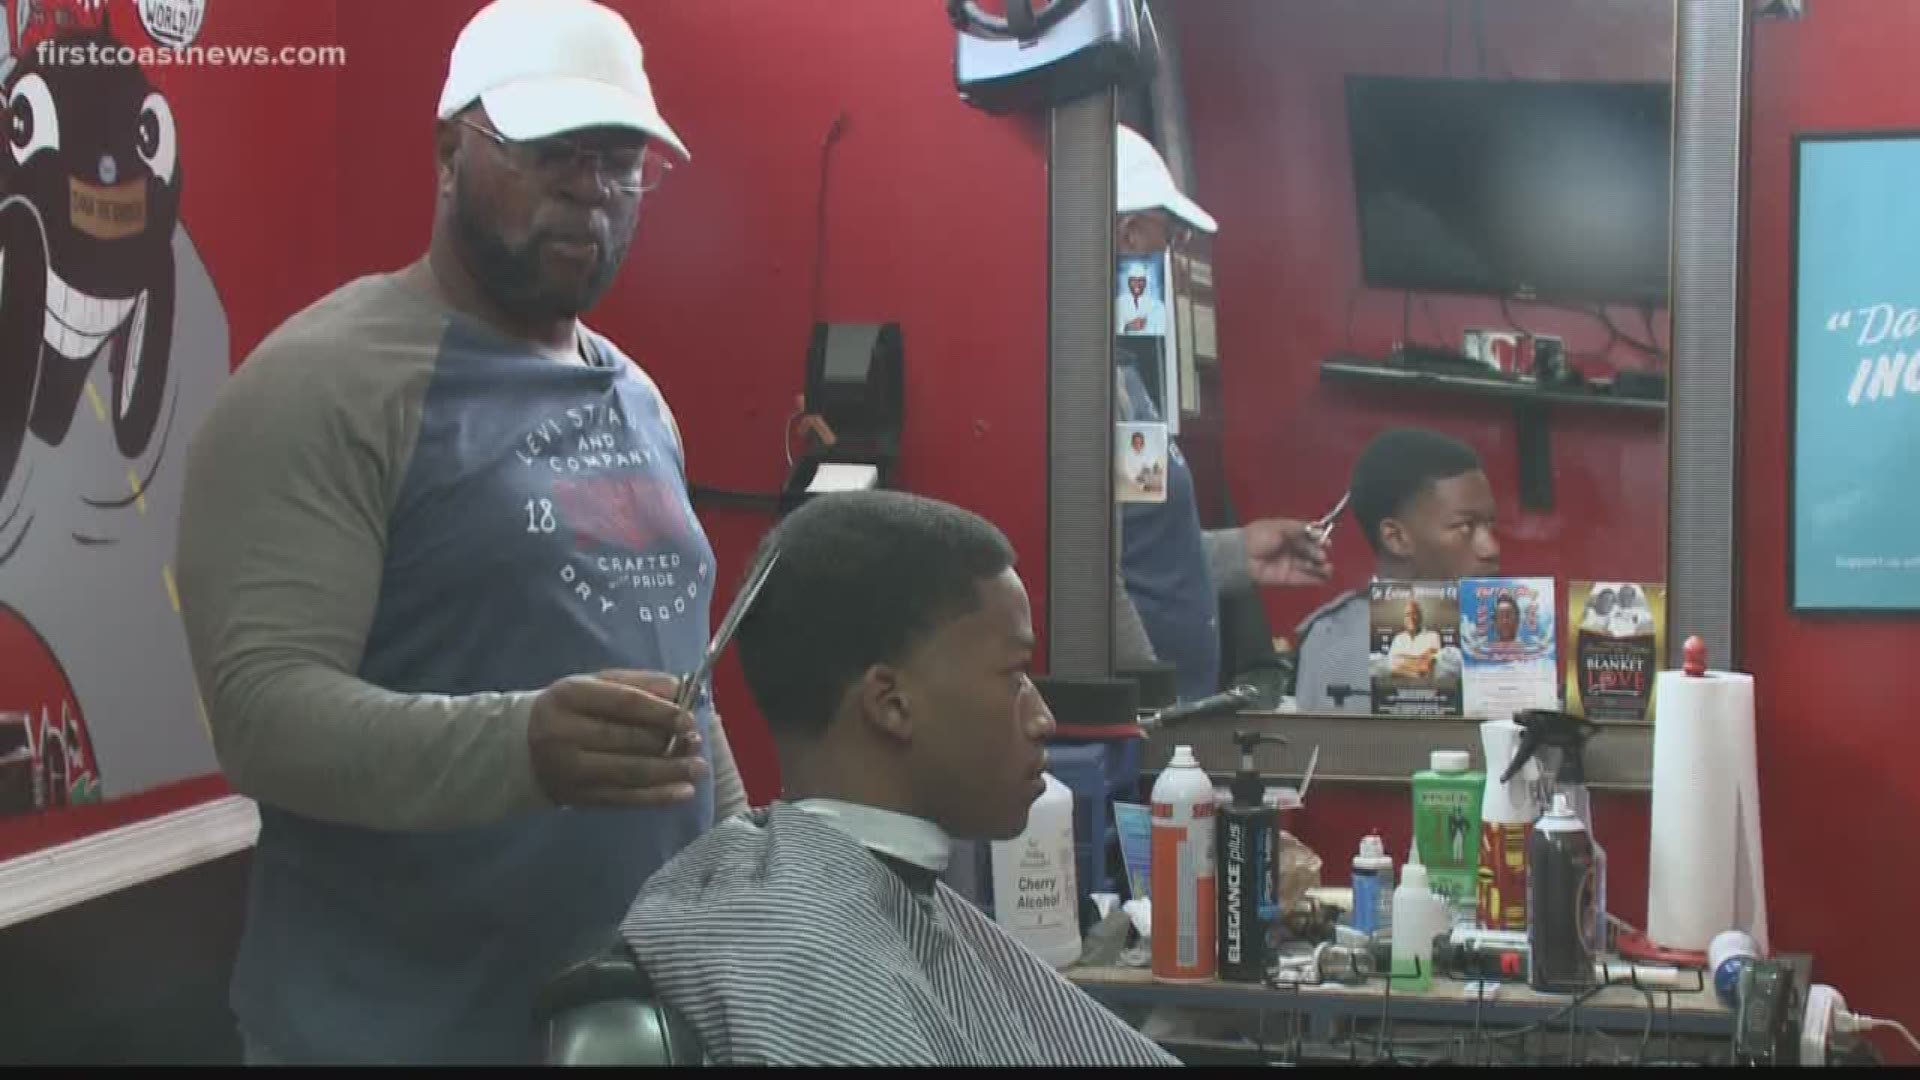 This barbershop not only stands as a place to cut hair, it's also a non-profit that can bring positive change to people's lives.